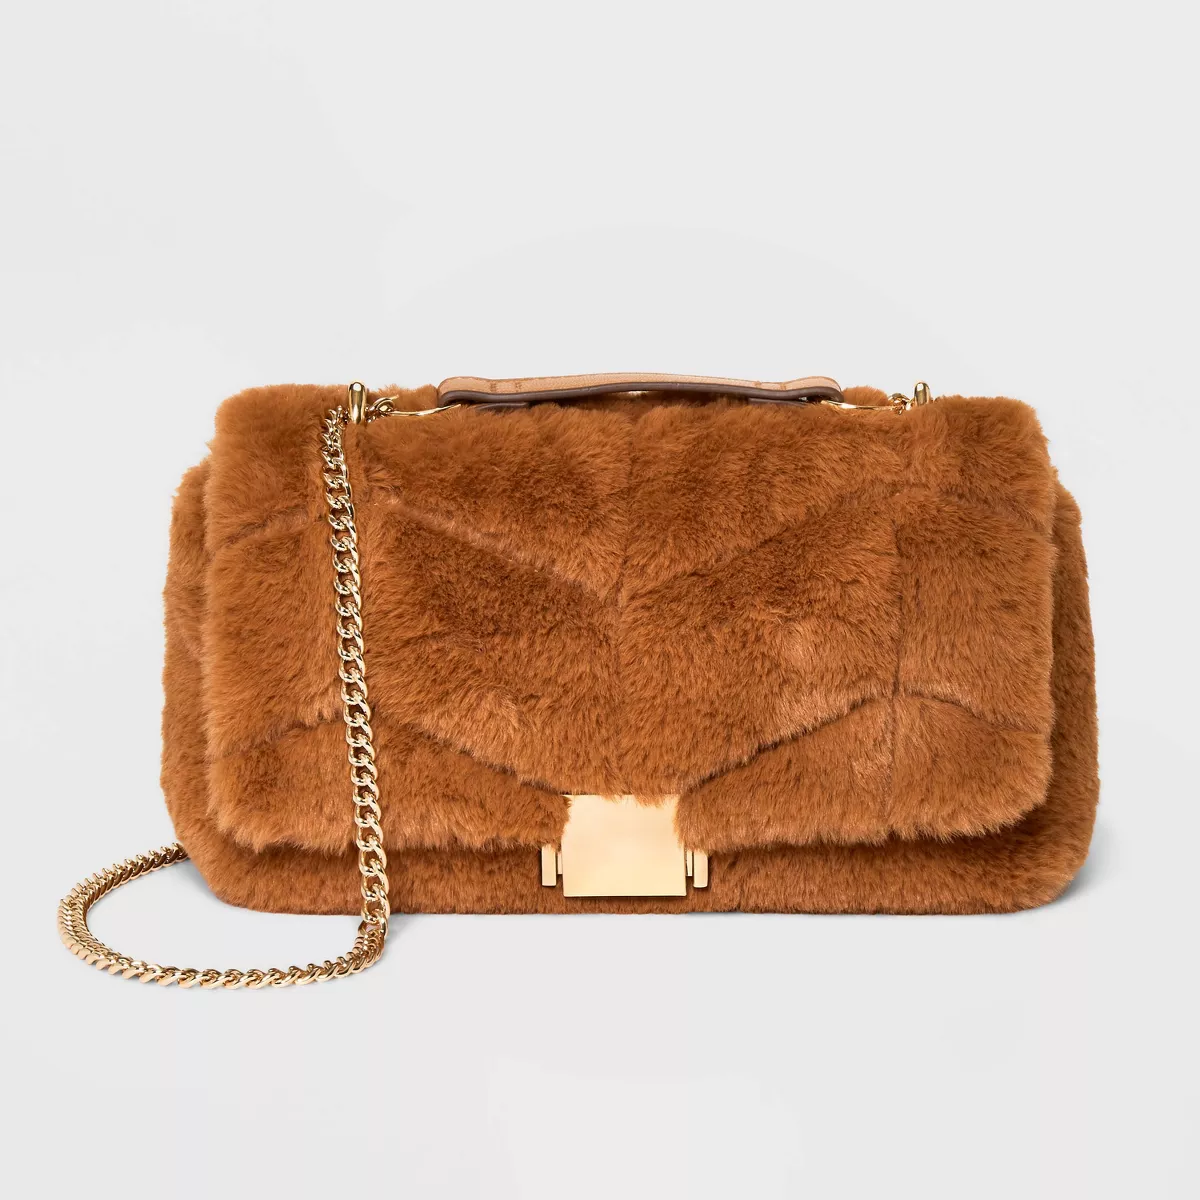 The Best Trending Non-Luxury Handbags for Fall at Target